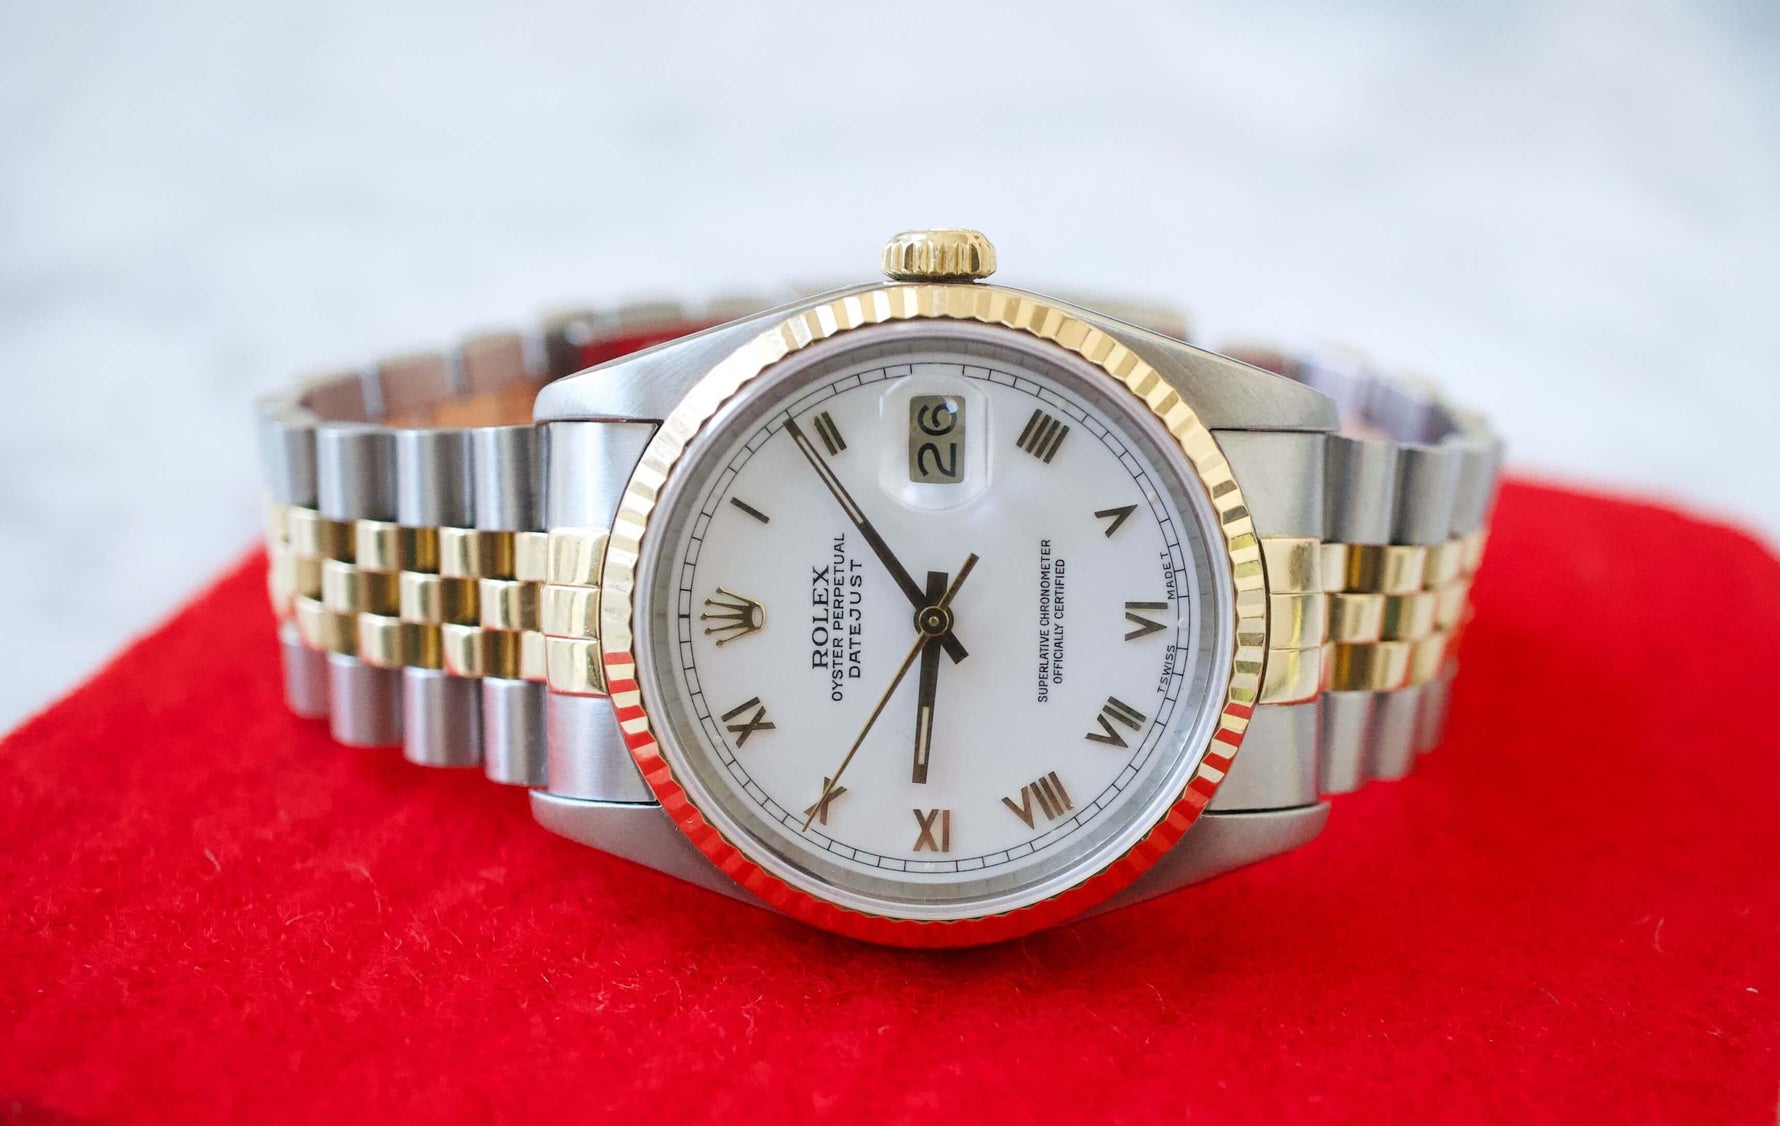 SOLD OUT: Rolex Datejust 16233 36MM Jubilee White Dial with Box and Papers - WearingTime Luxury Watches